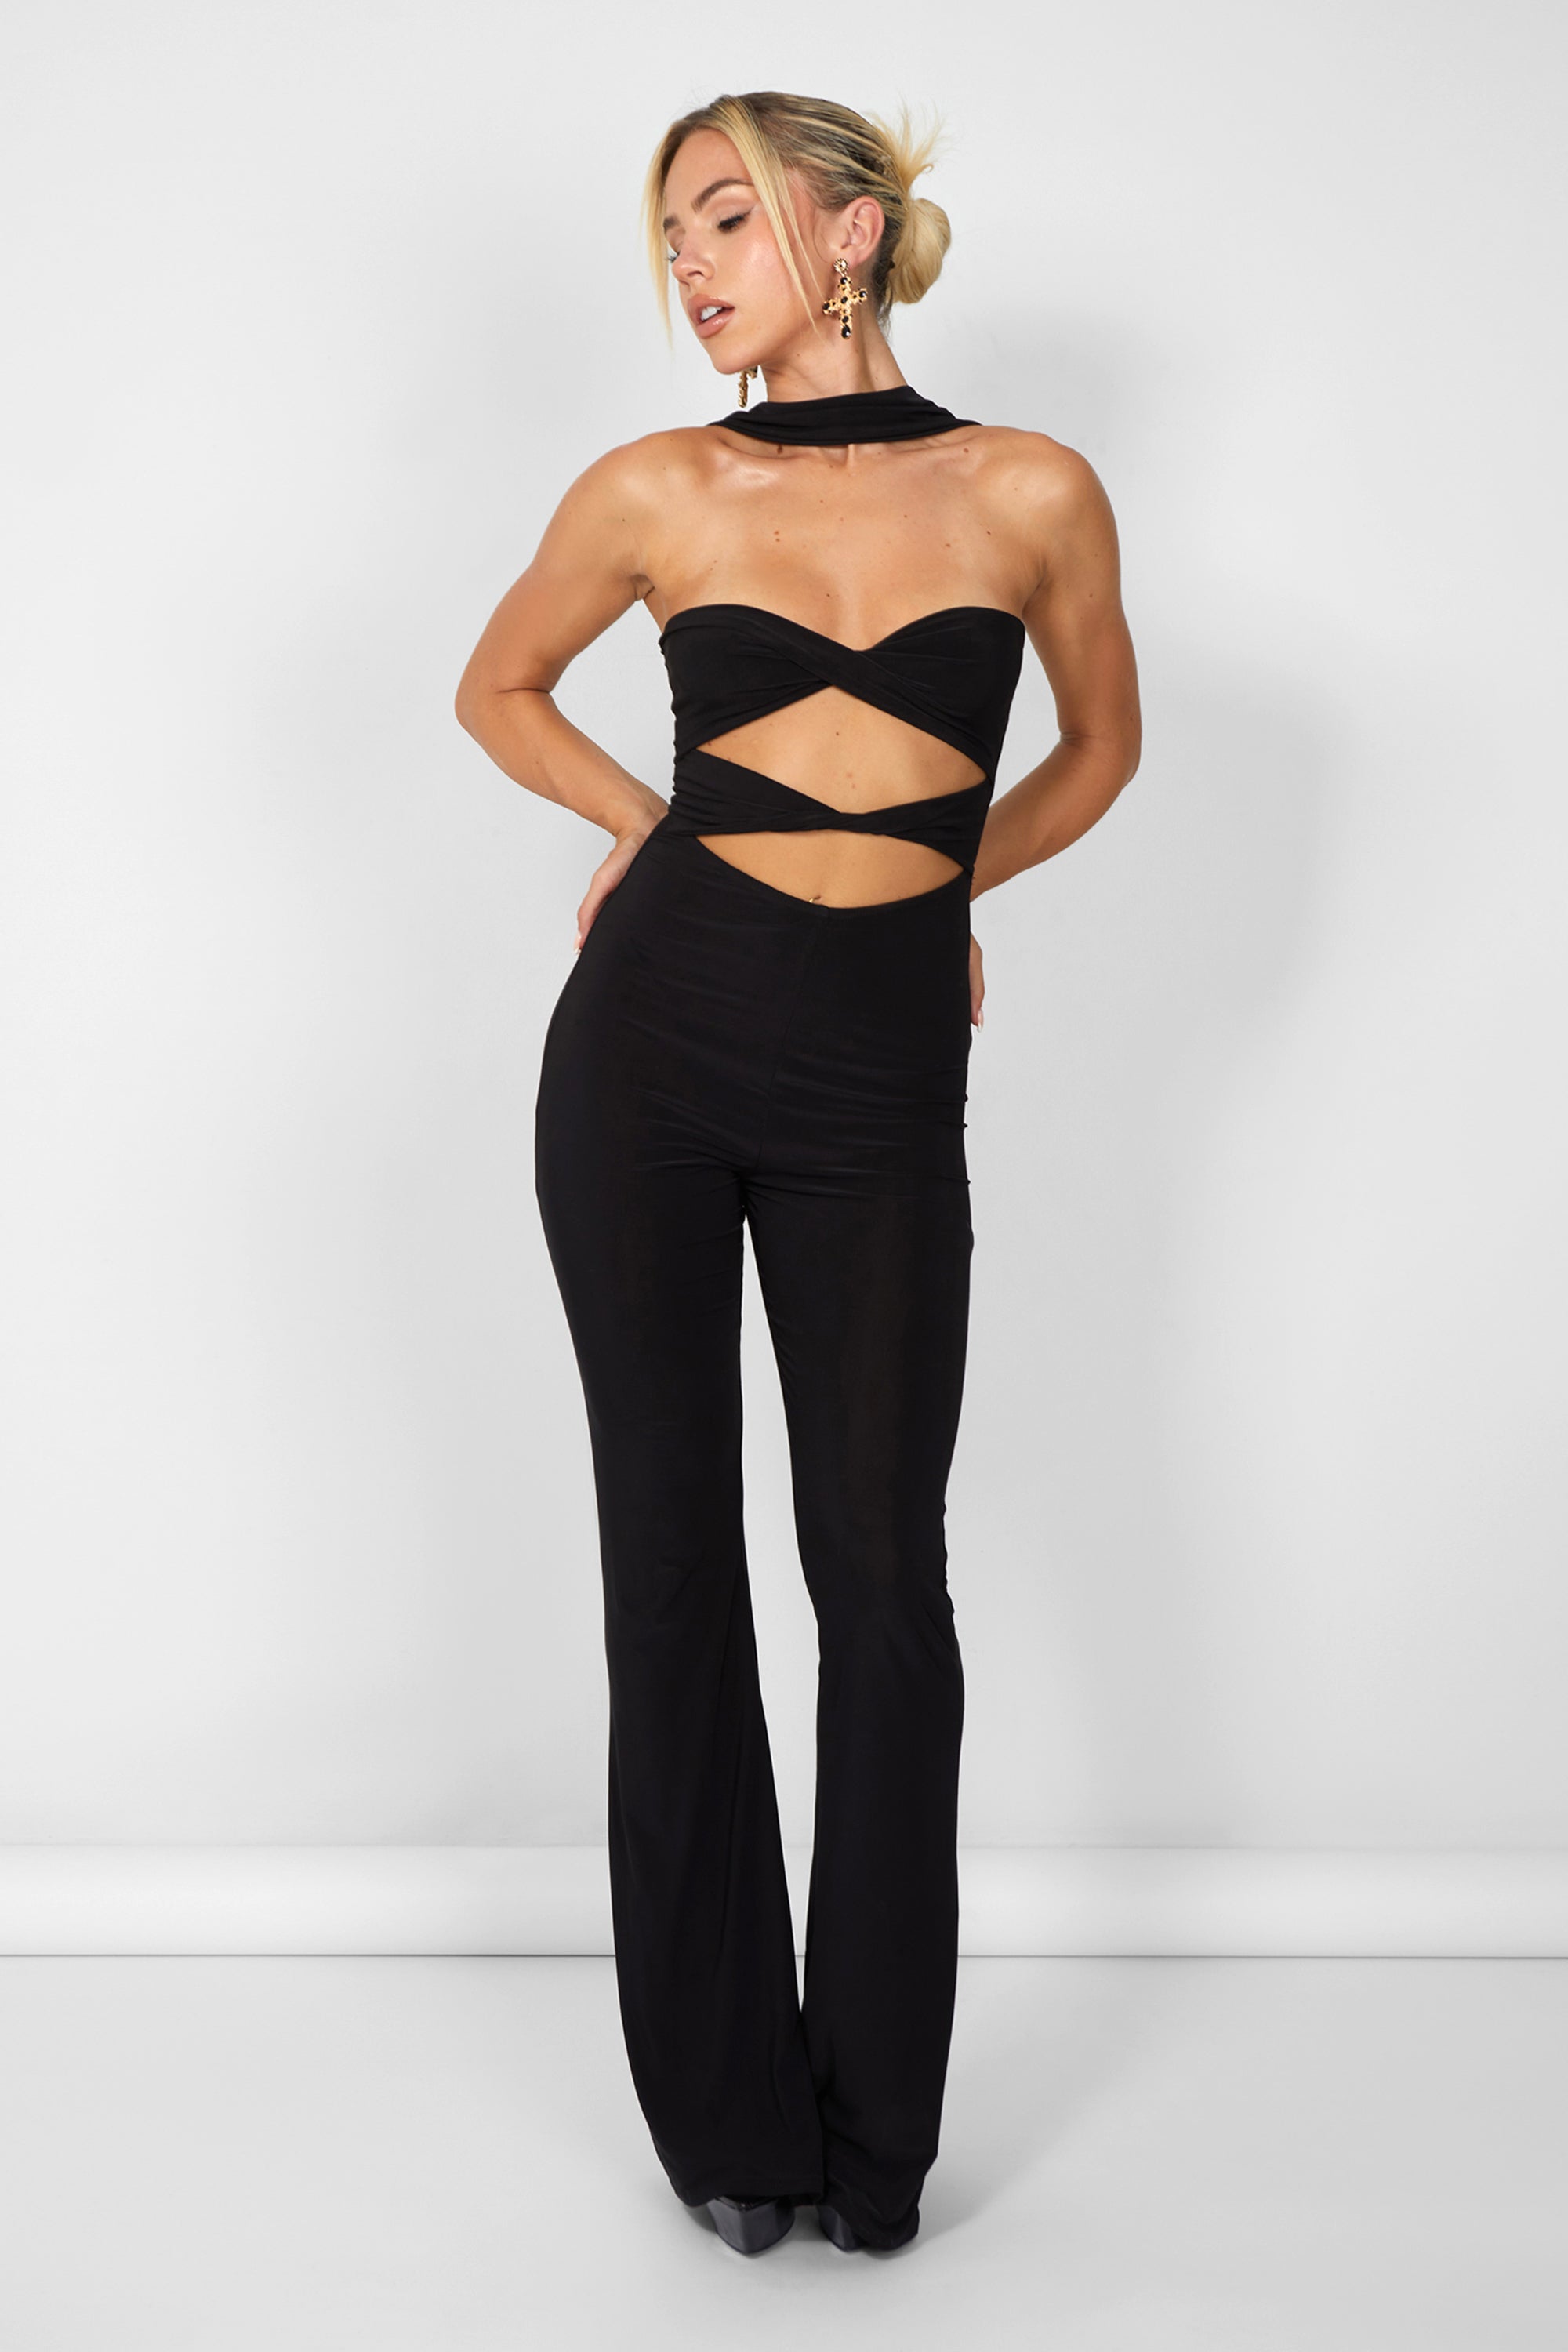 Image of Kaiia Slinky Choker Cut Out Jumpsuit in Black